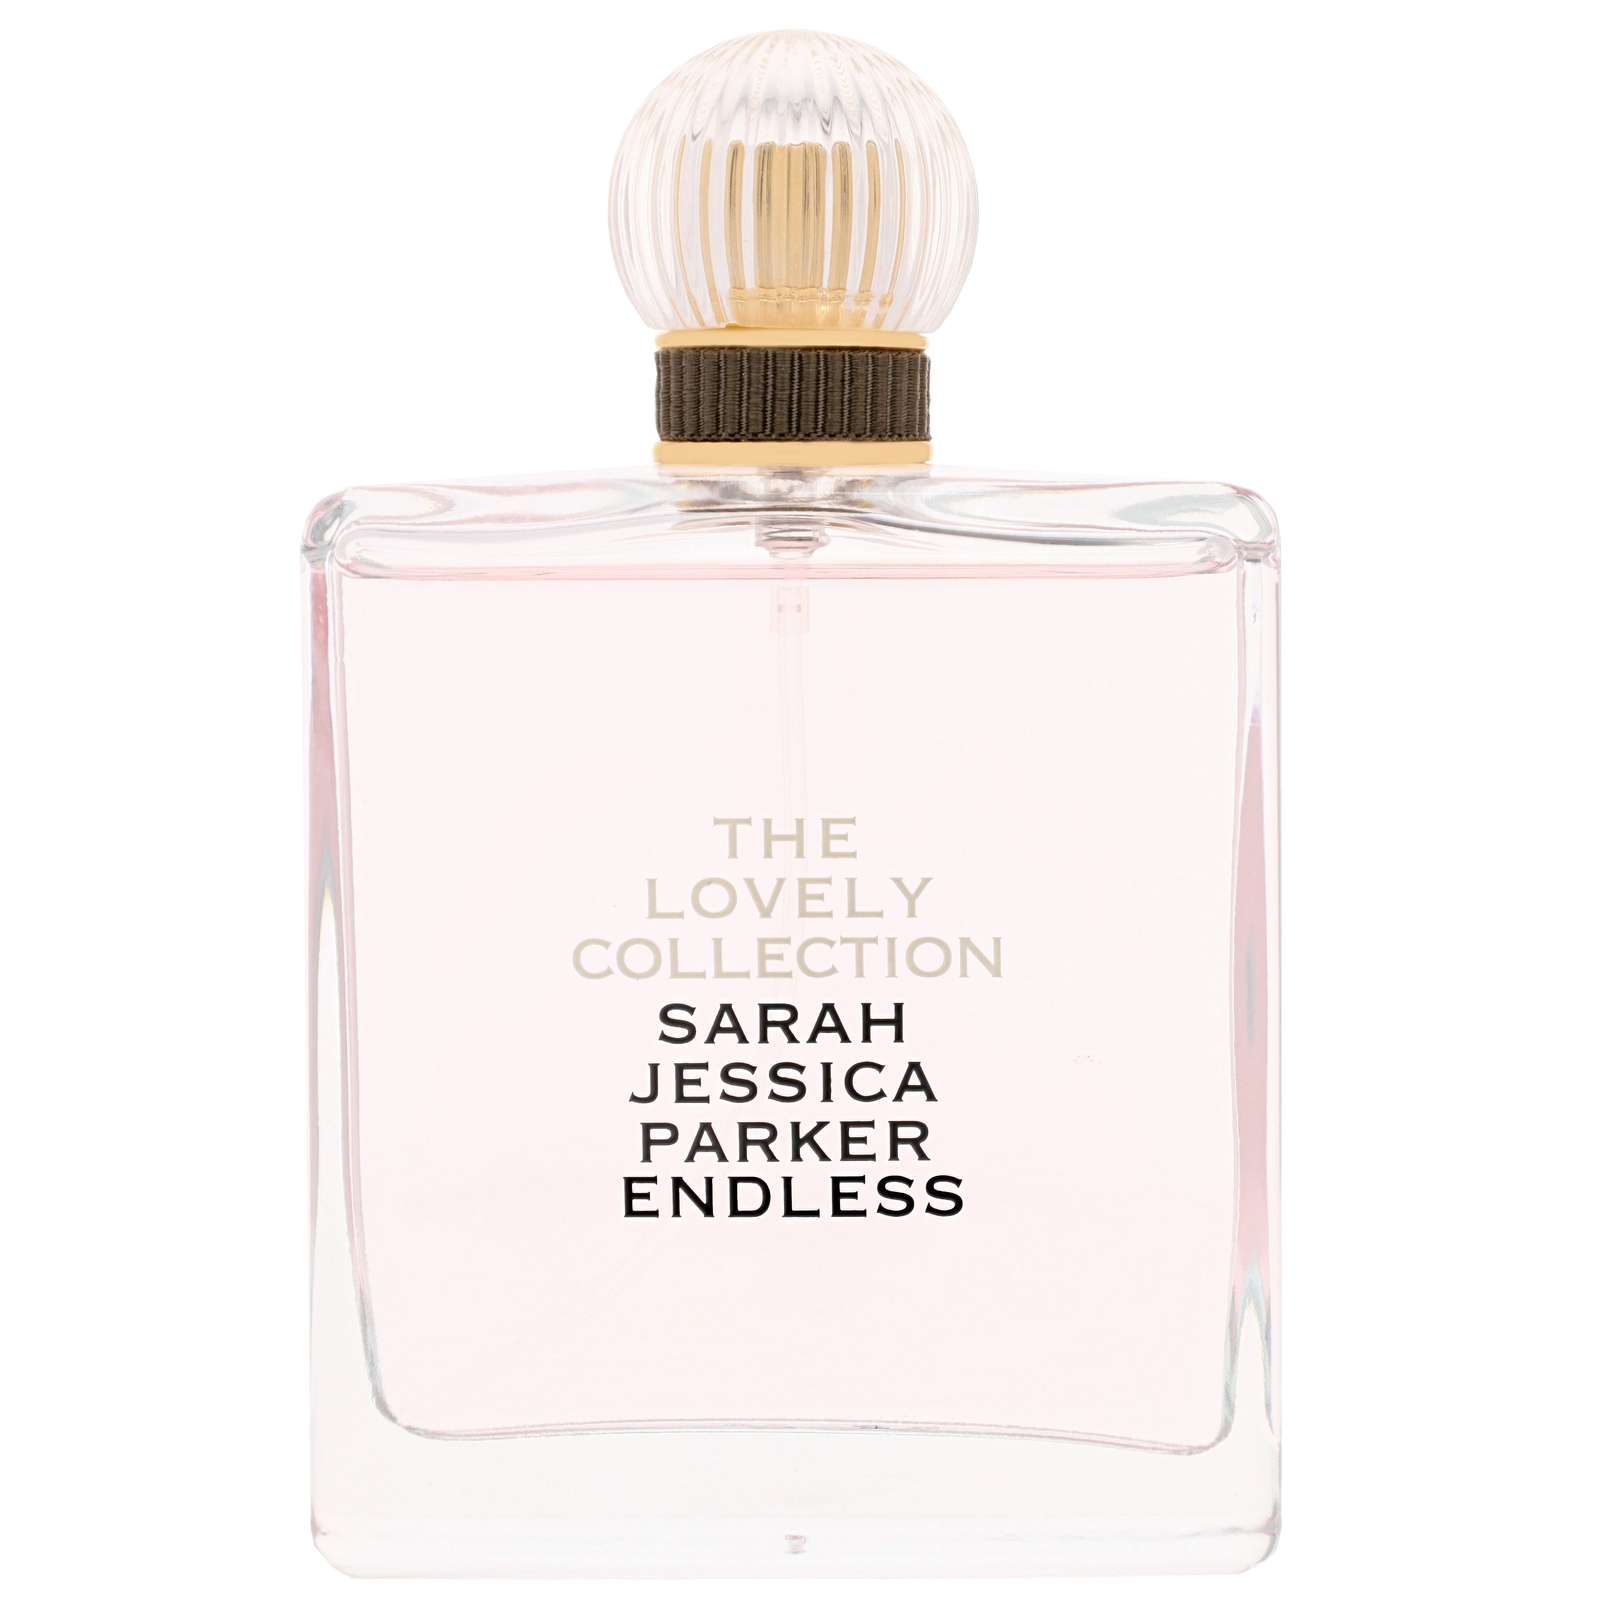 NEW Sarah Jessica Parker The Lovely Collection Endless EDP Spray 100ml - Picture 1 of 1